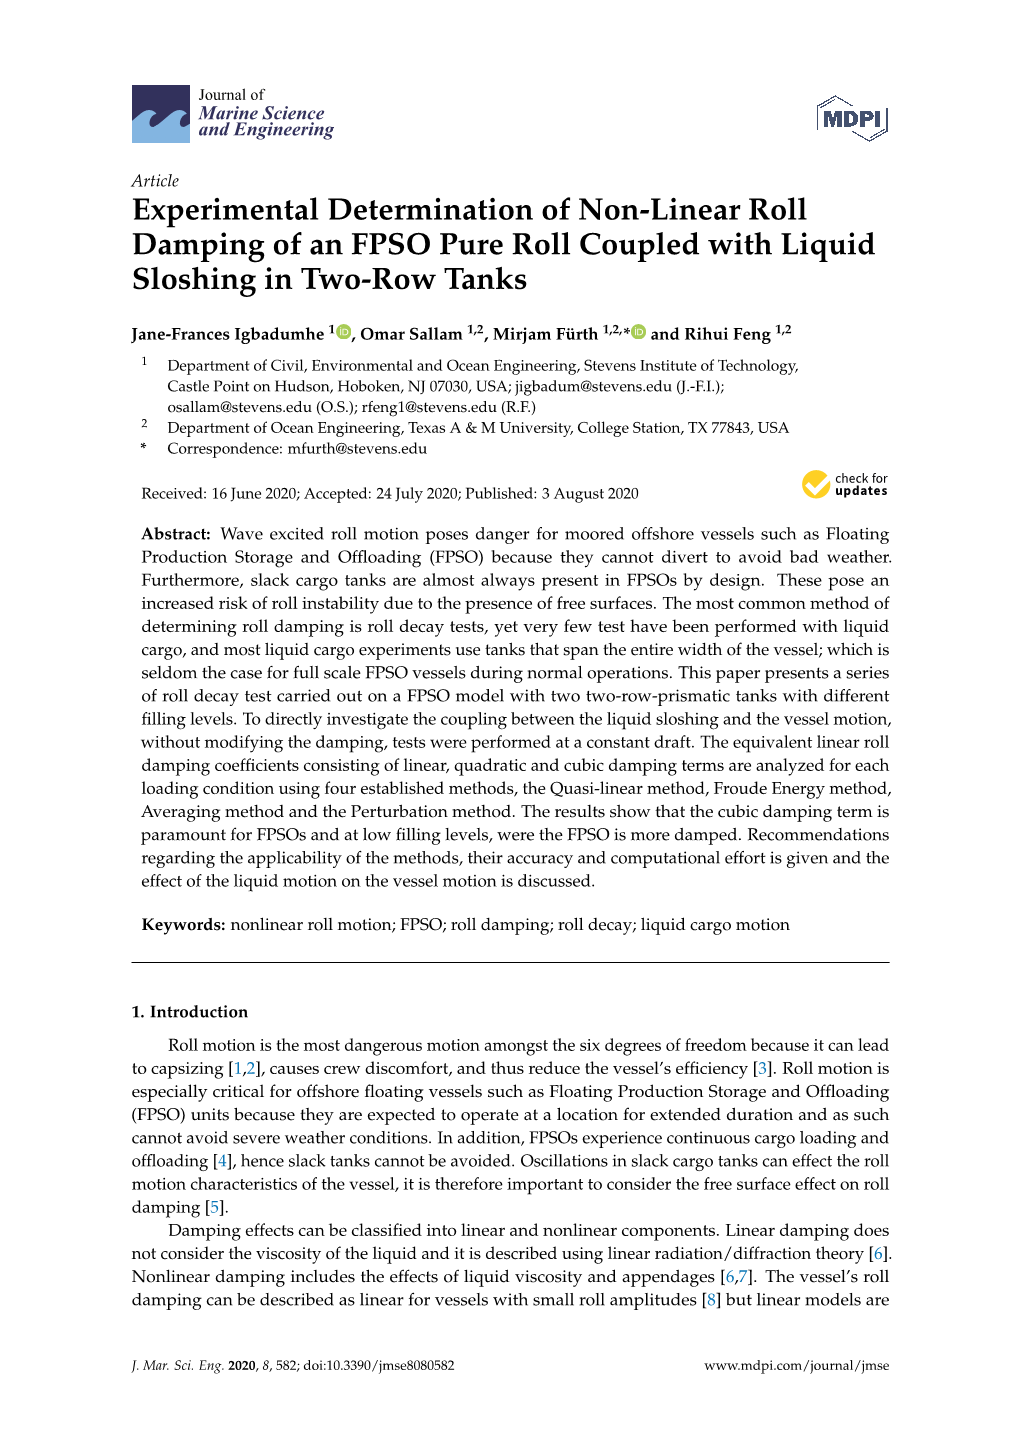 Experimental Determination of Non-Linear Roll Damping of an FPSO Pure Roll Coupled with Liquid Sloshing in Two-Row Tanks